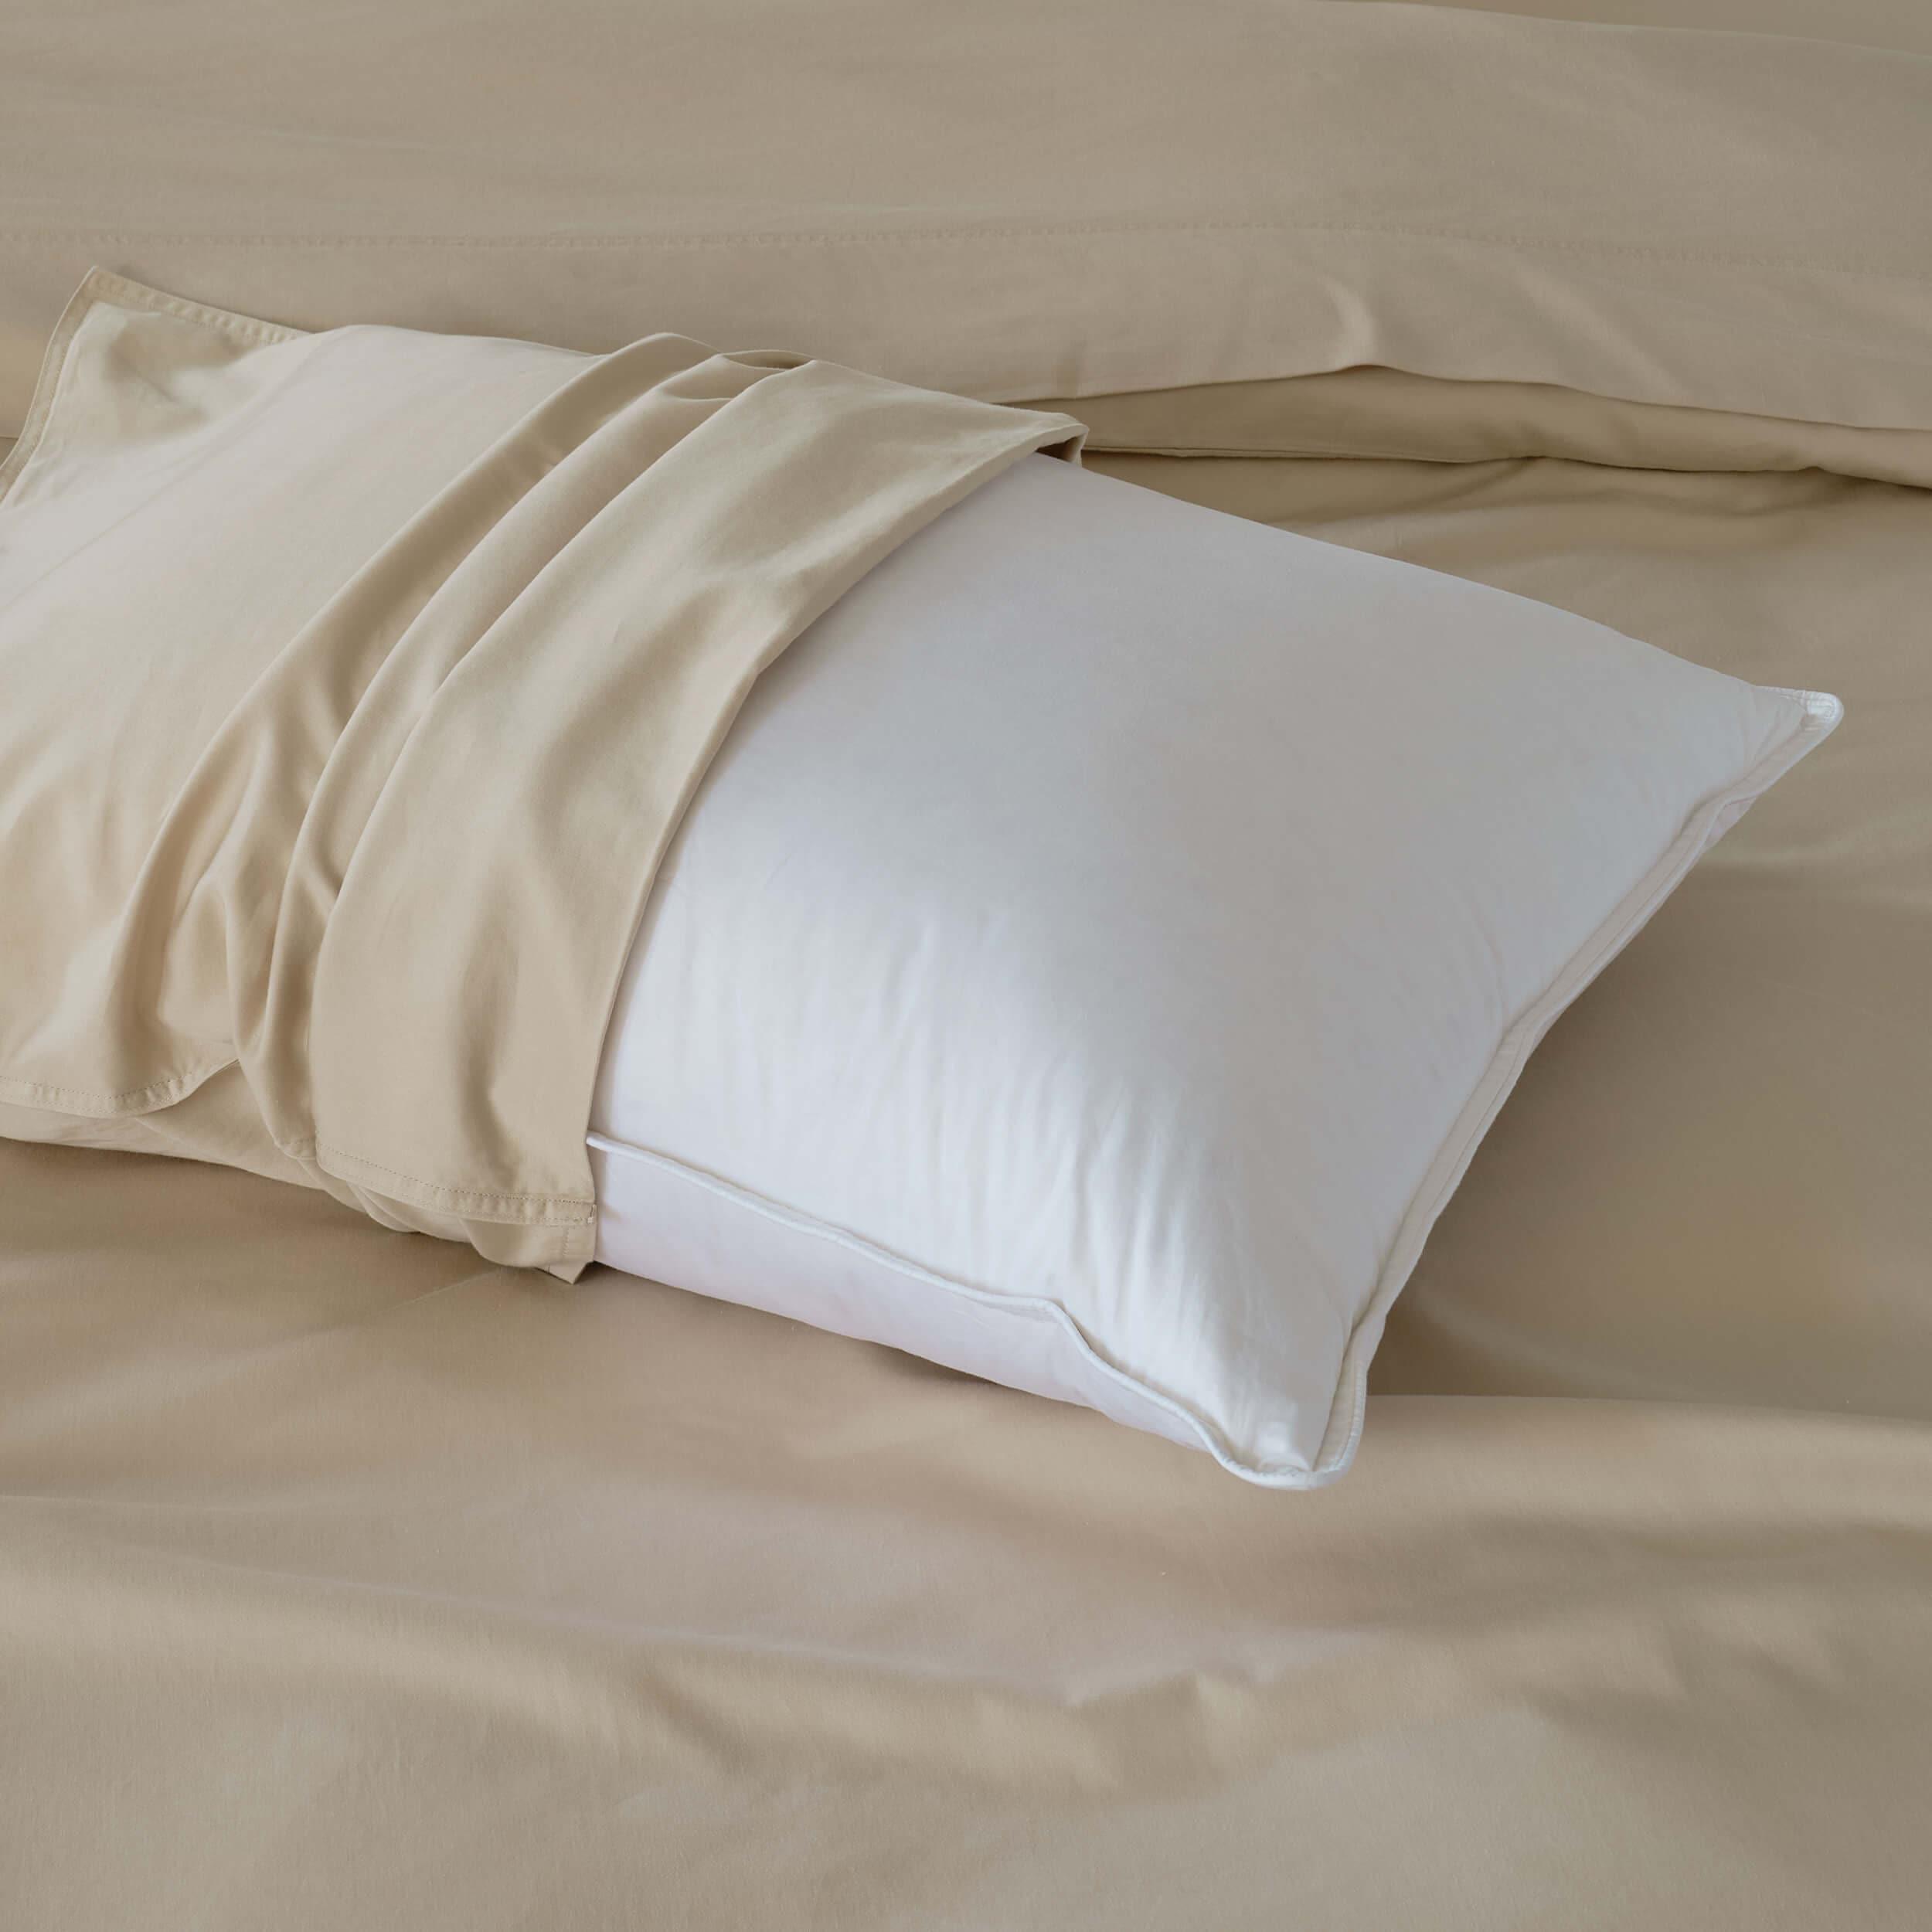 The white down pillow offers a cloud-like softness and support for a restful night's sleep.